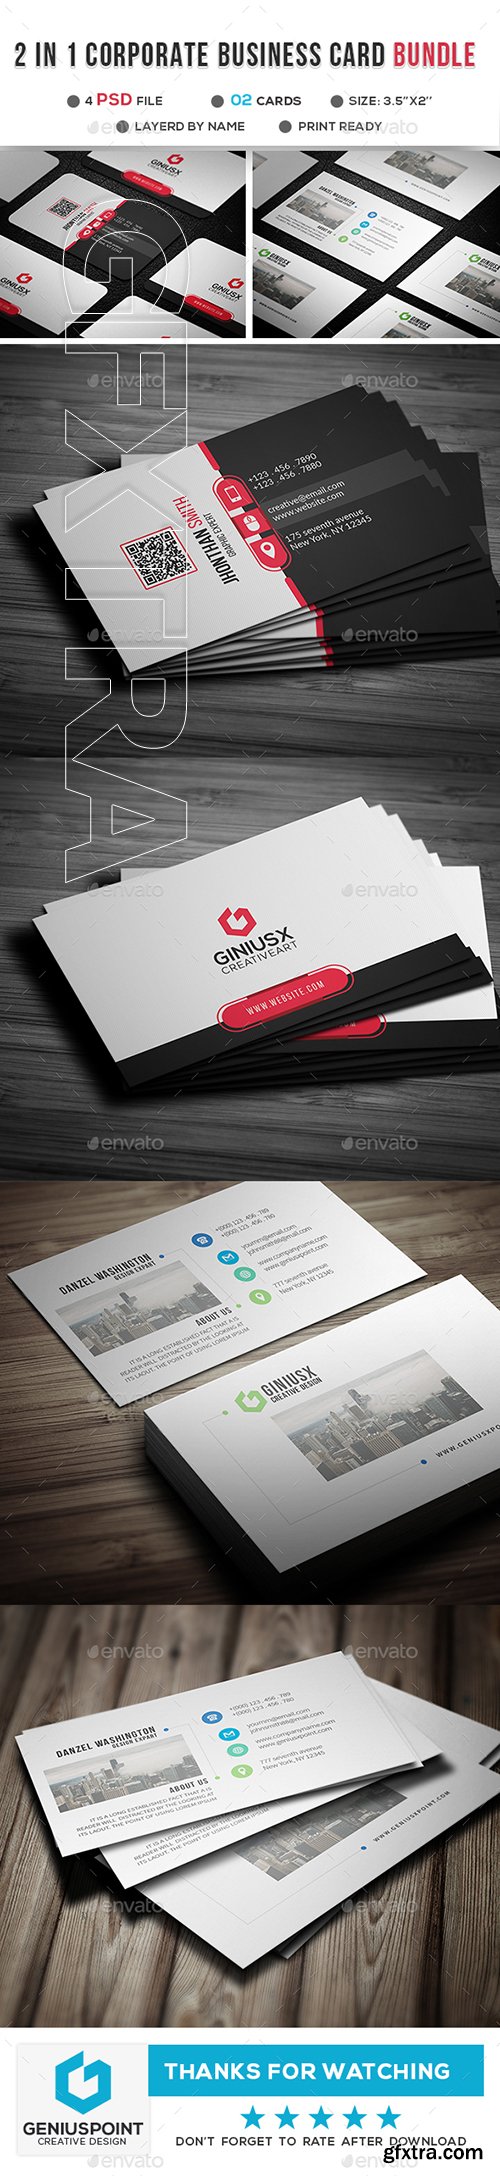 GraphicRiver - 2 in 1 Business Card Bundle 22865394